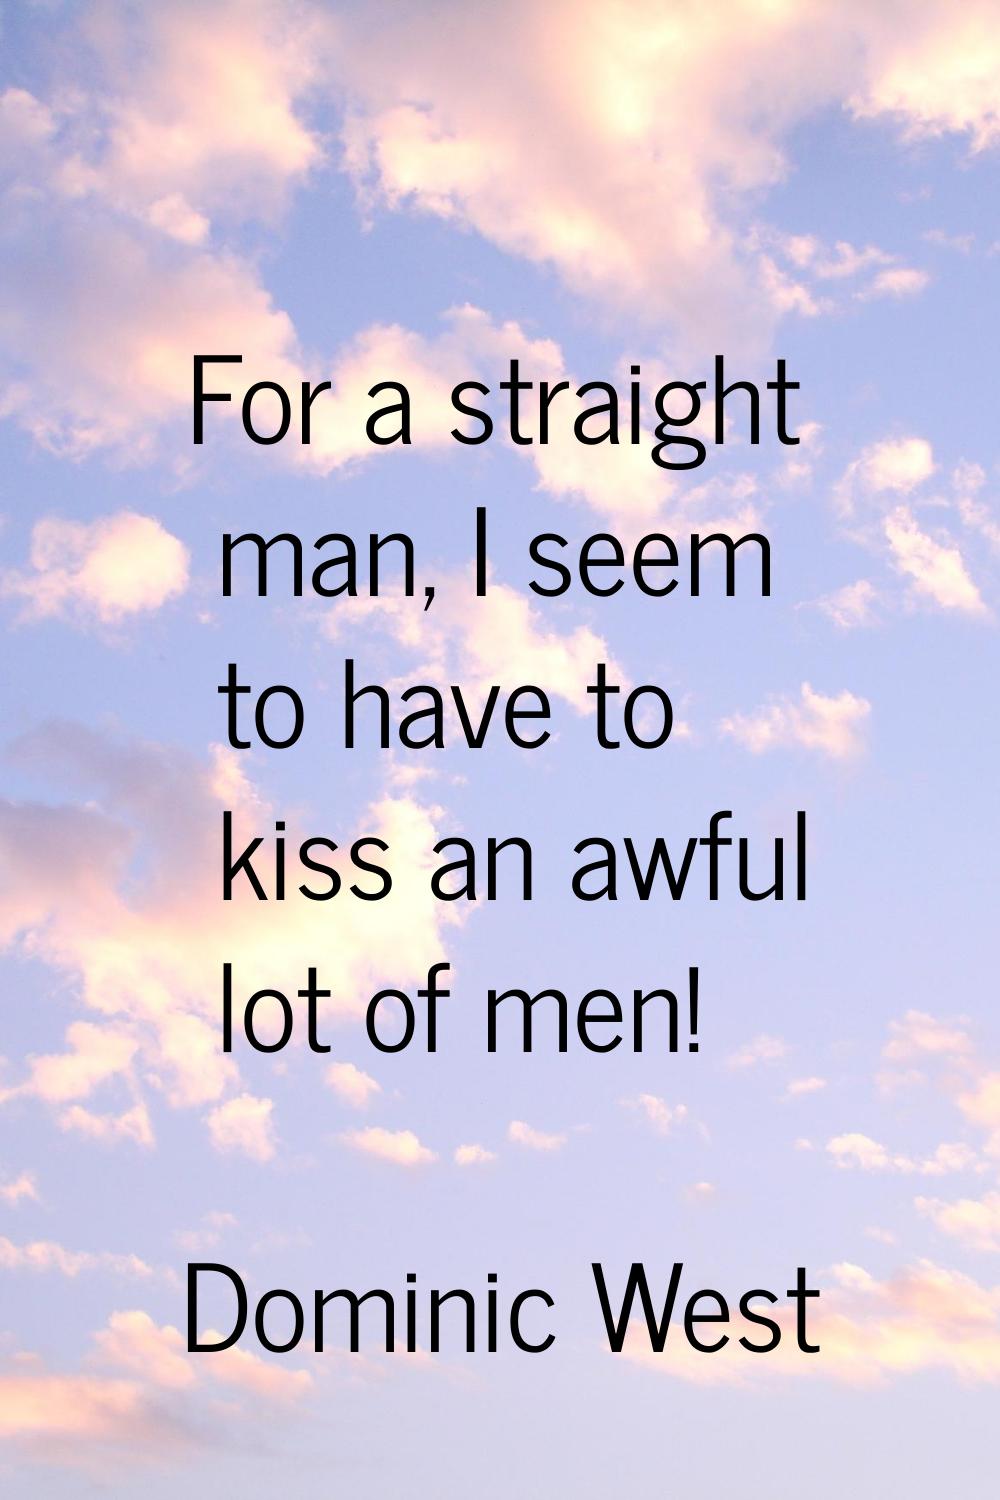 For a straight man, I seem to have to kiss an awful lot of men!